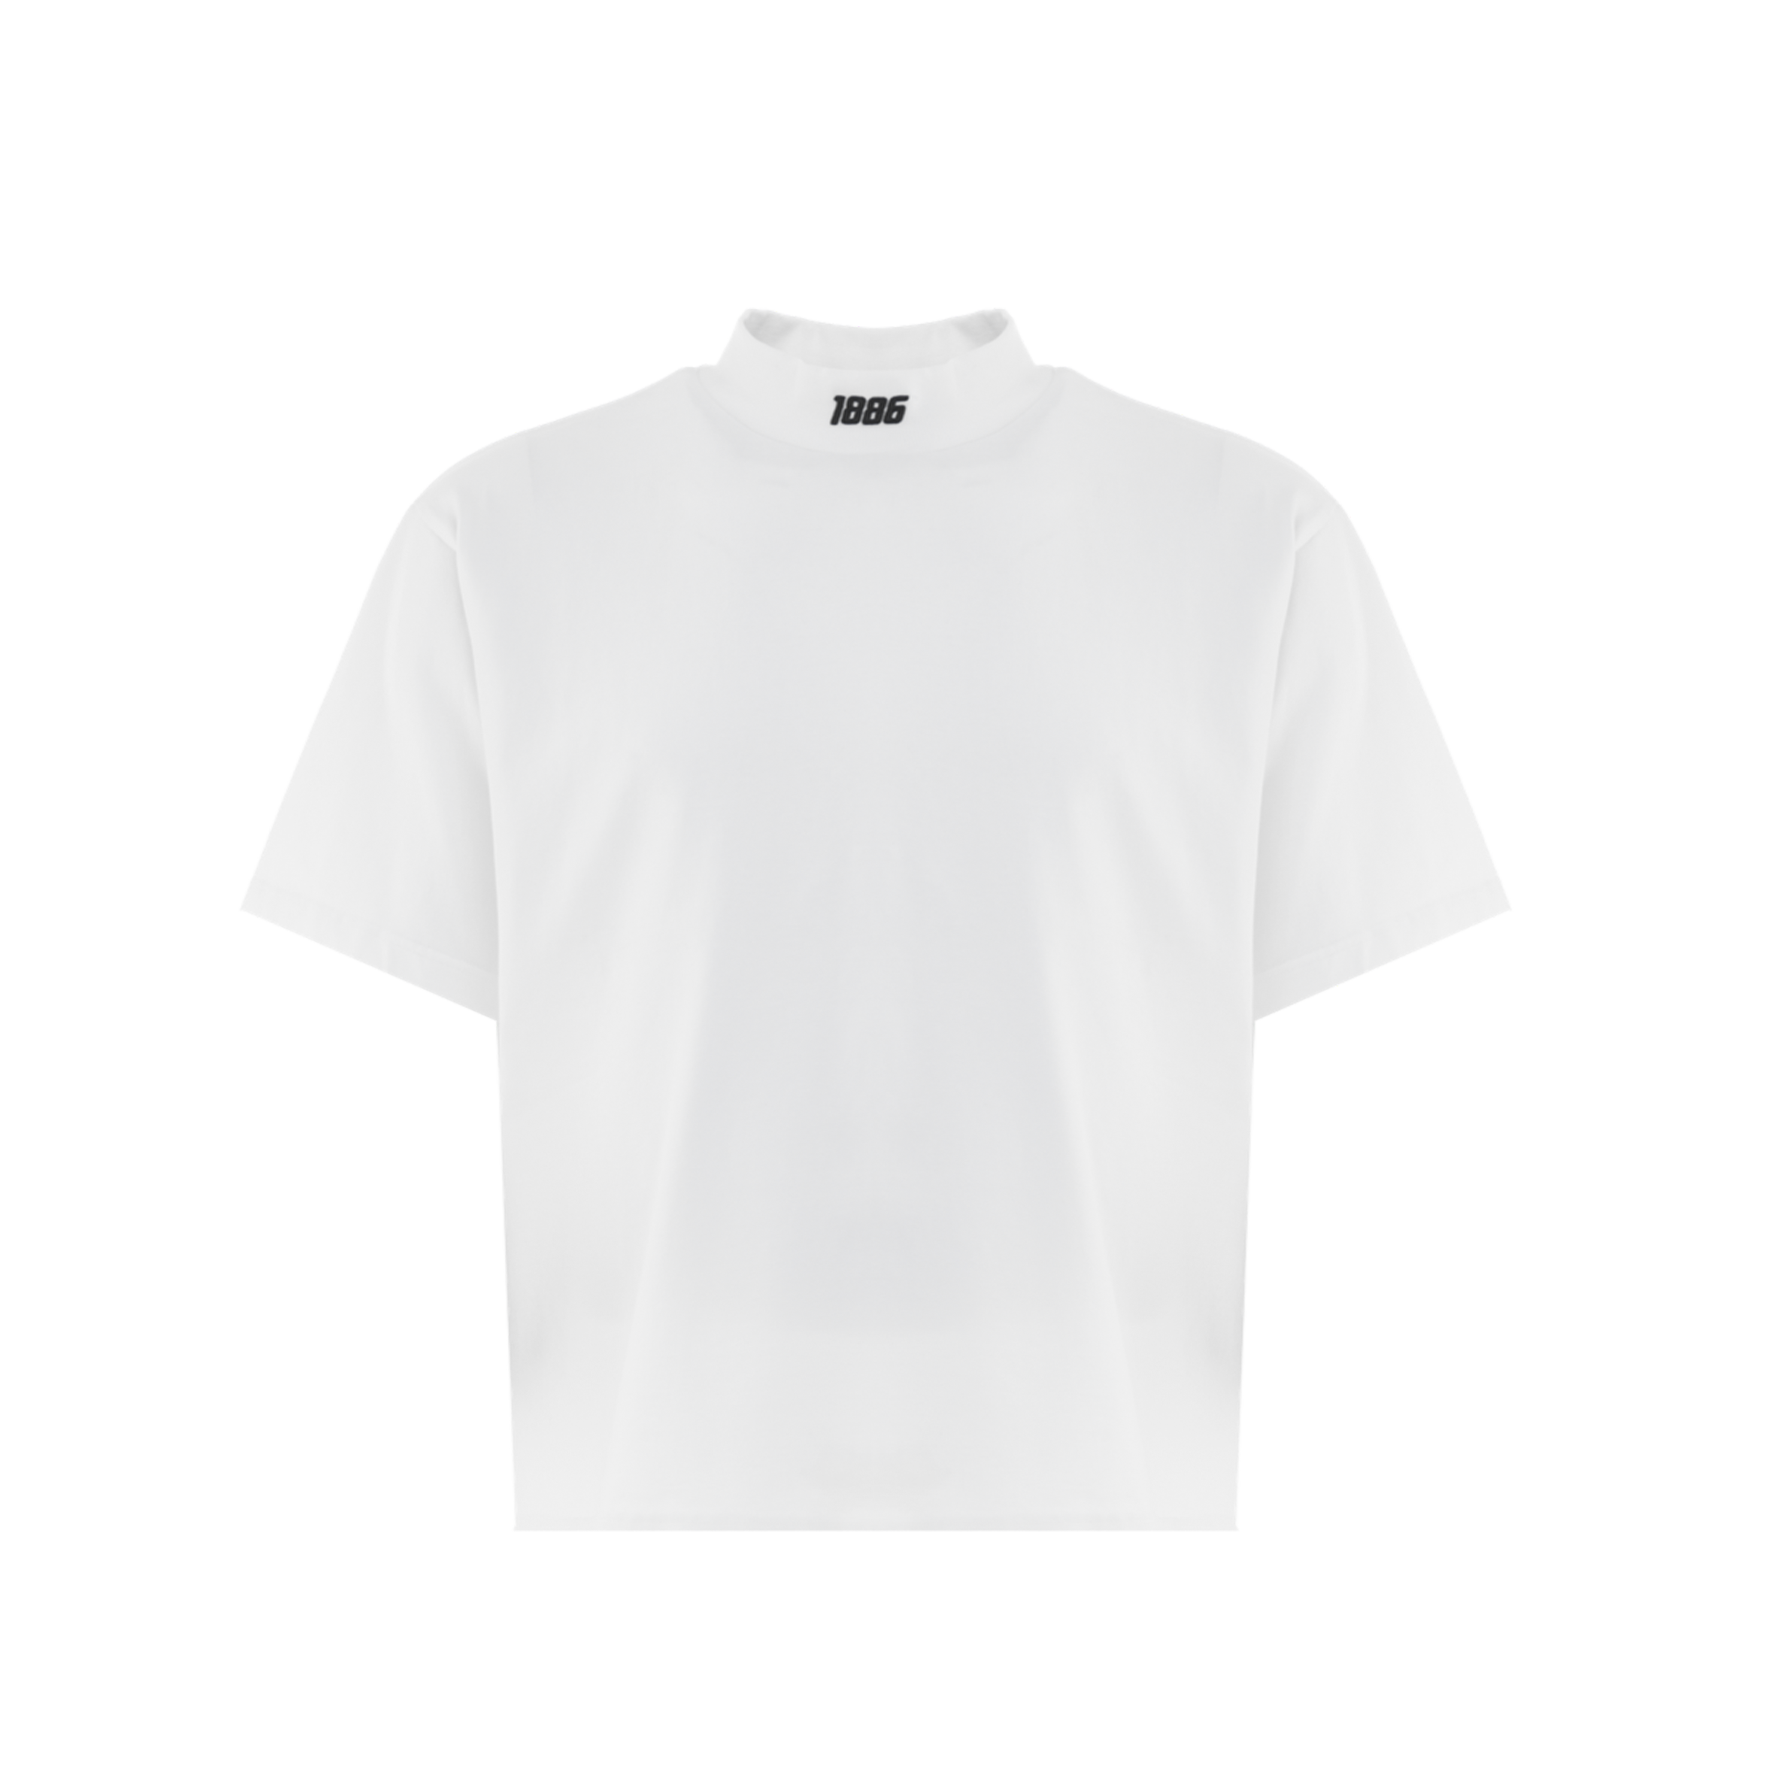 BUTTERFLY TURTLENECK T-SHIRT - OFF WHITE